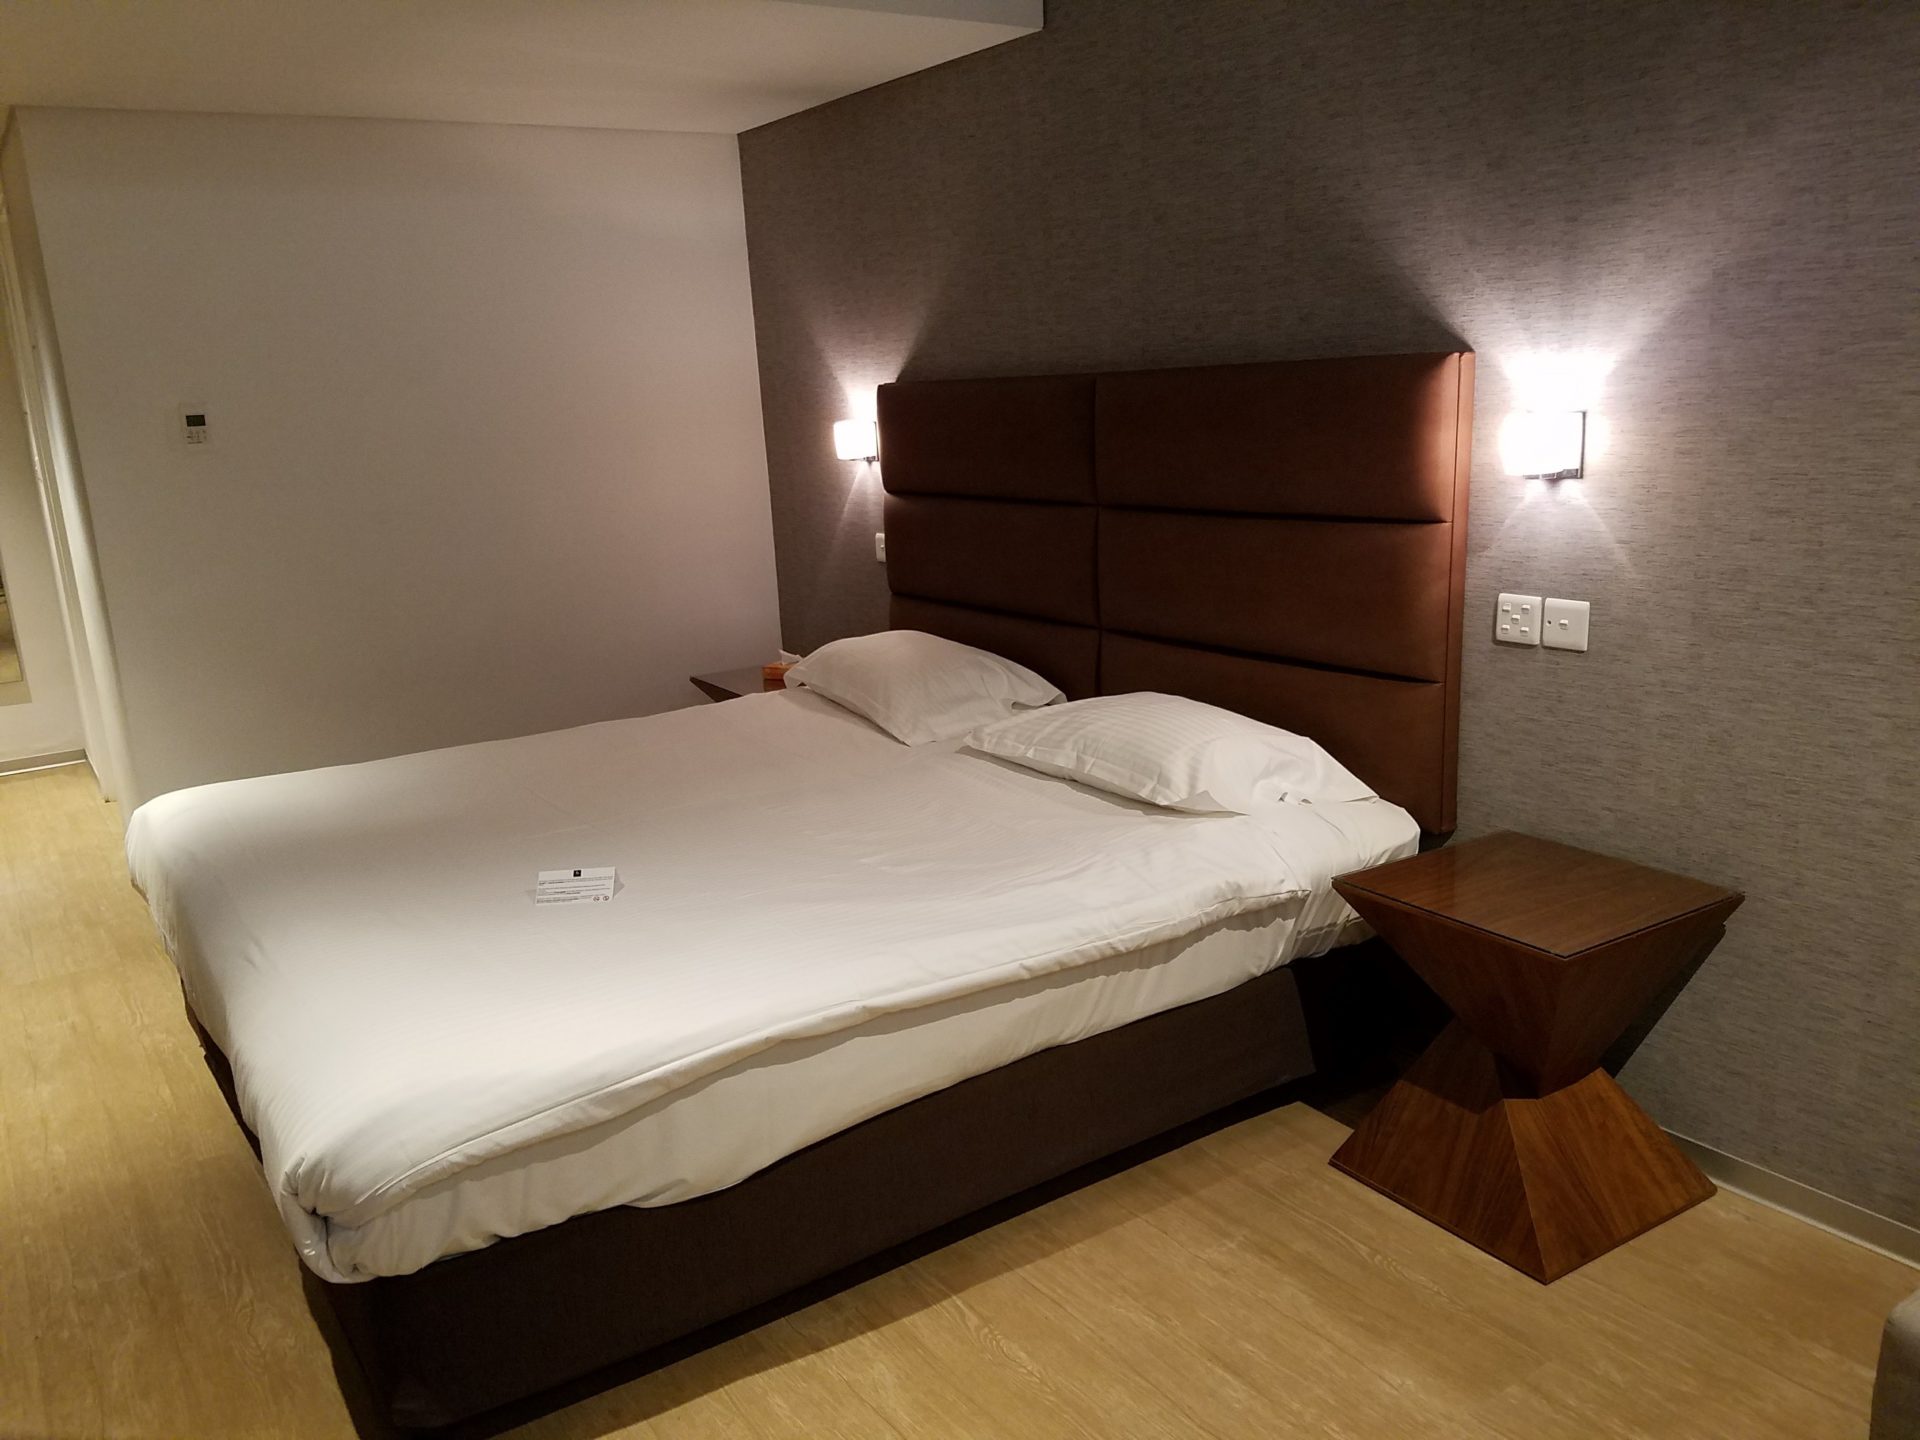 a bed with a headboard and a table